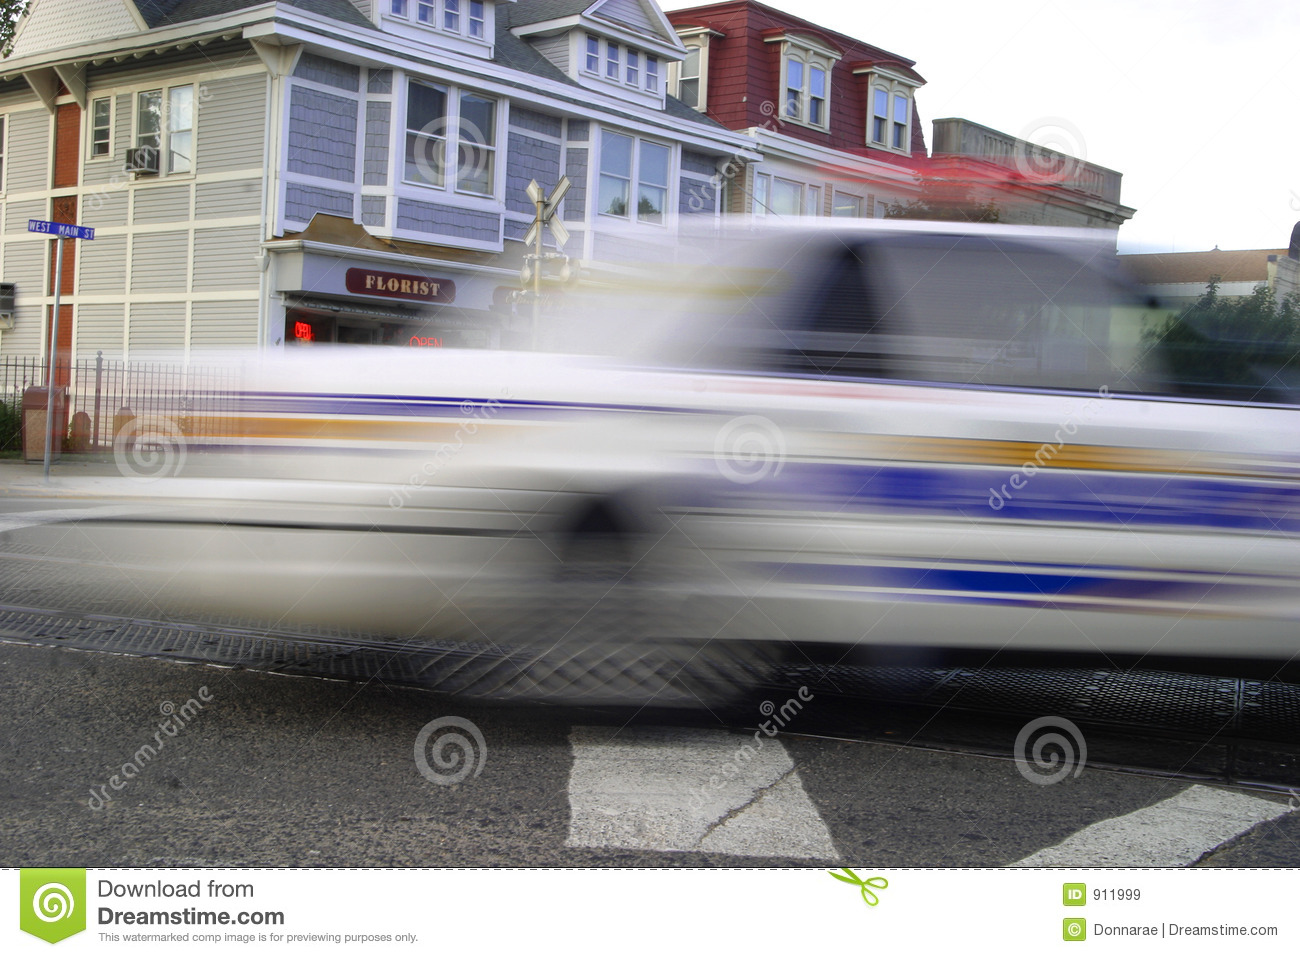 Police Car On The Moveurgency City Lifemotionprotectionauthorityphoto